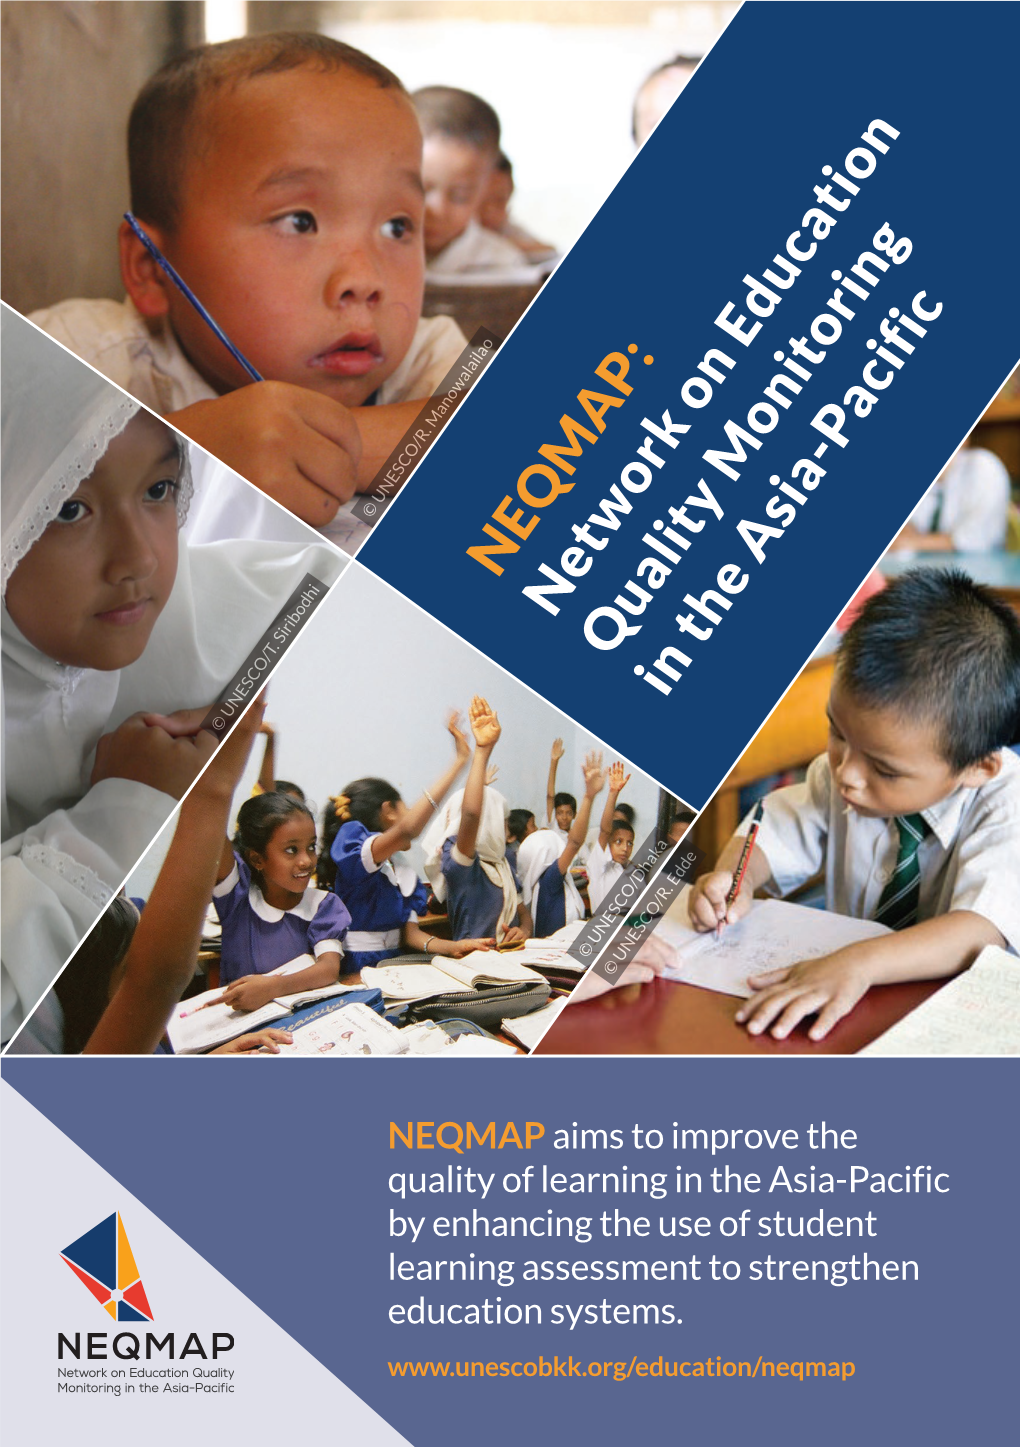 NEQMAP: Network on Education Quality Monitoring in the Asia-Pacific